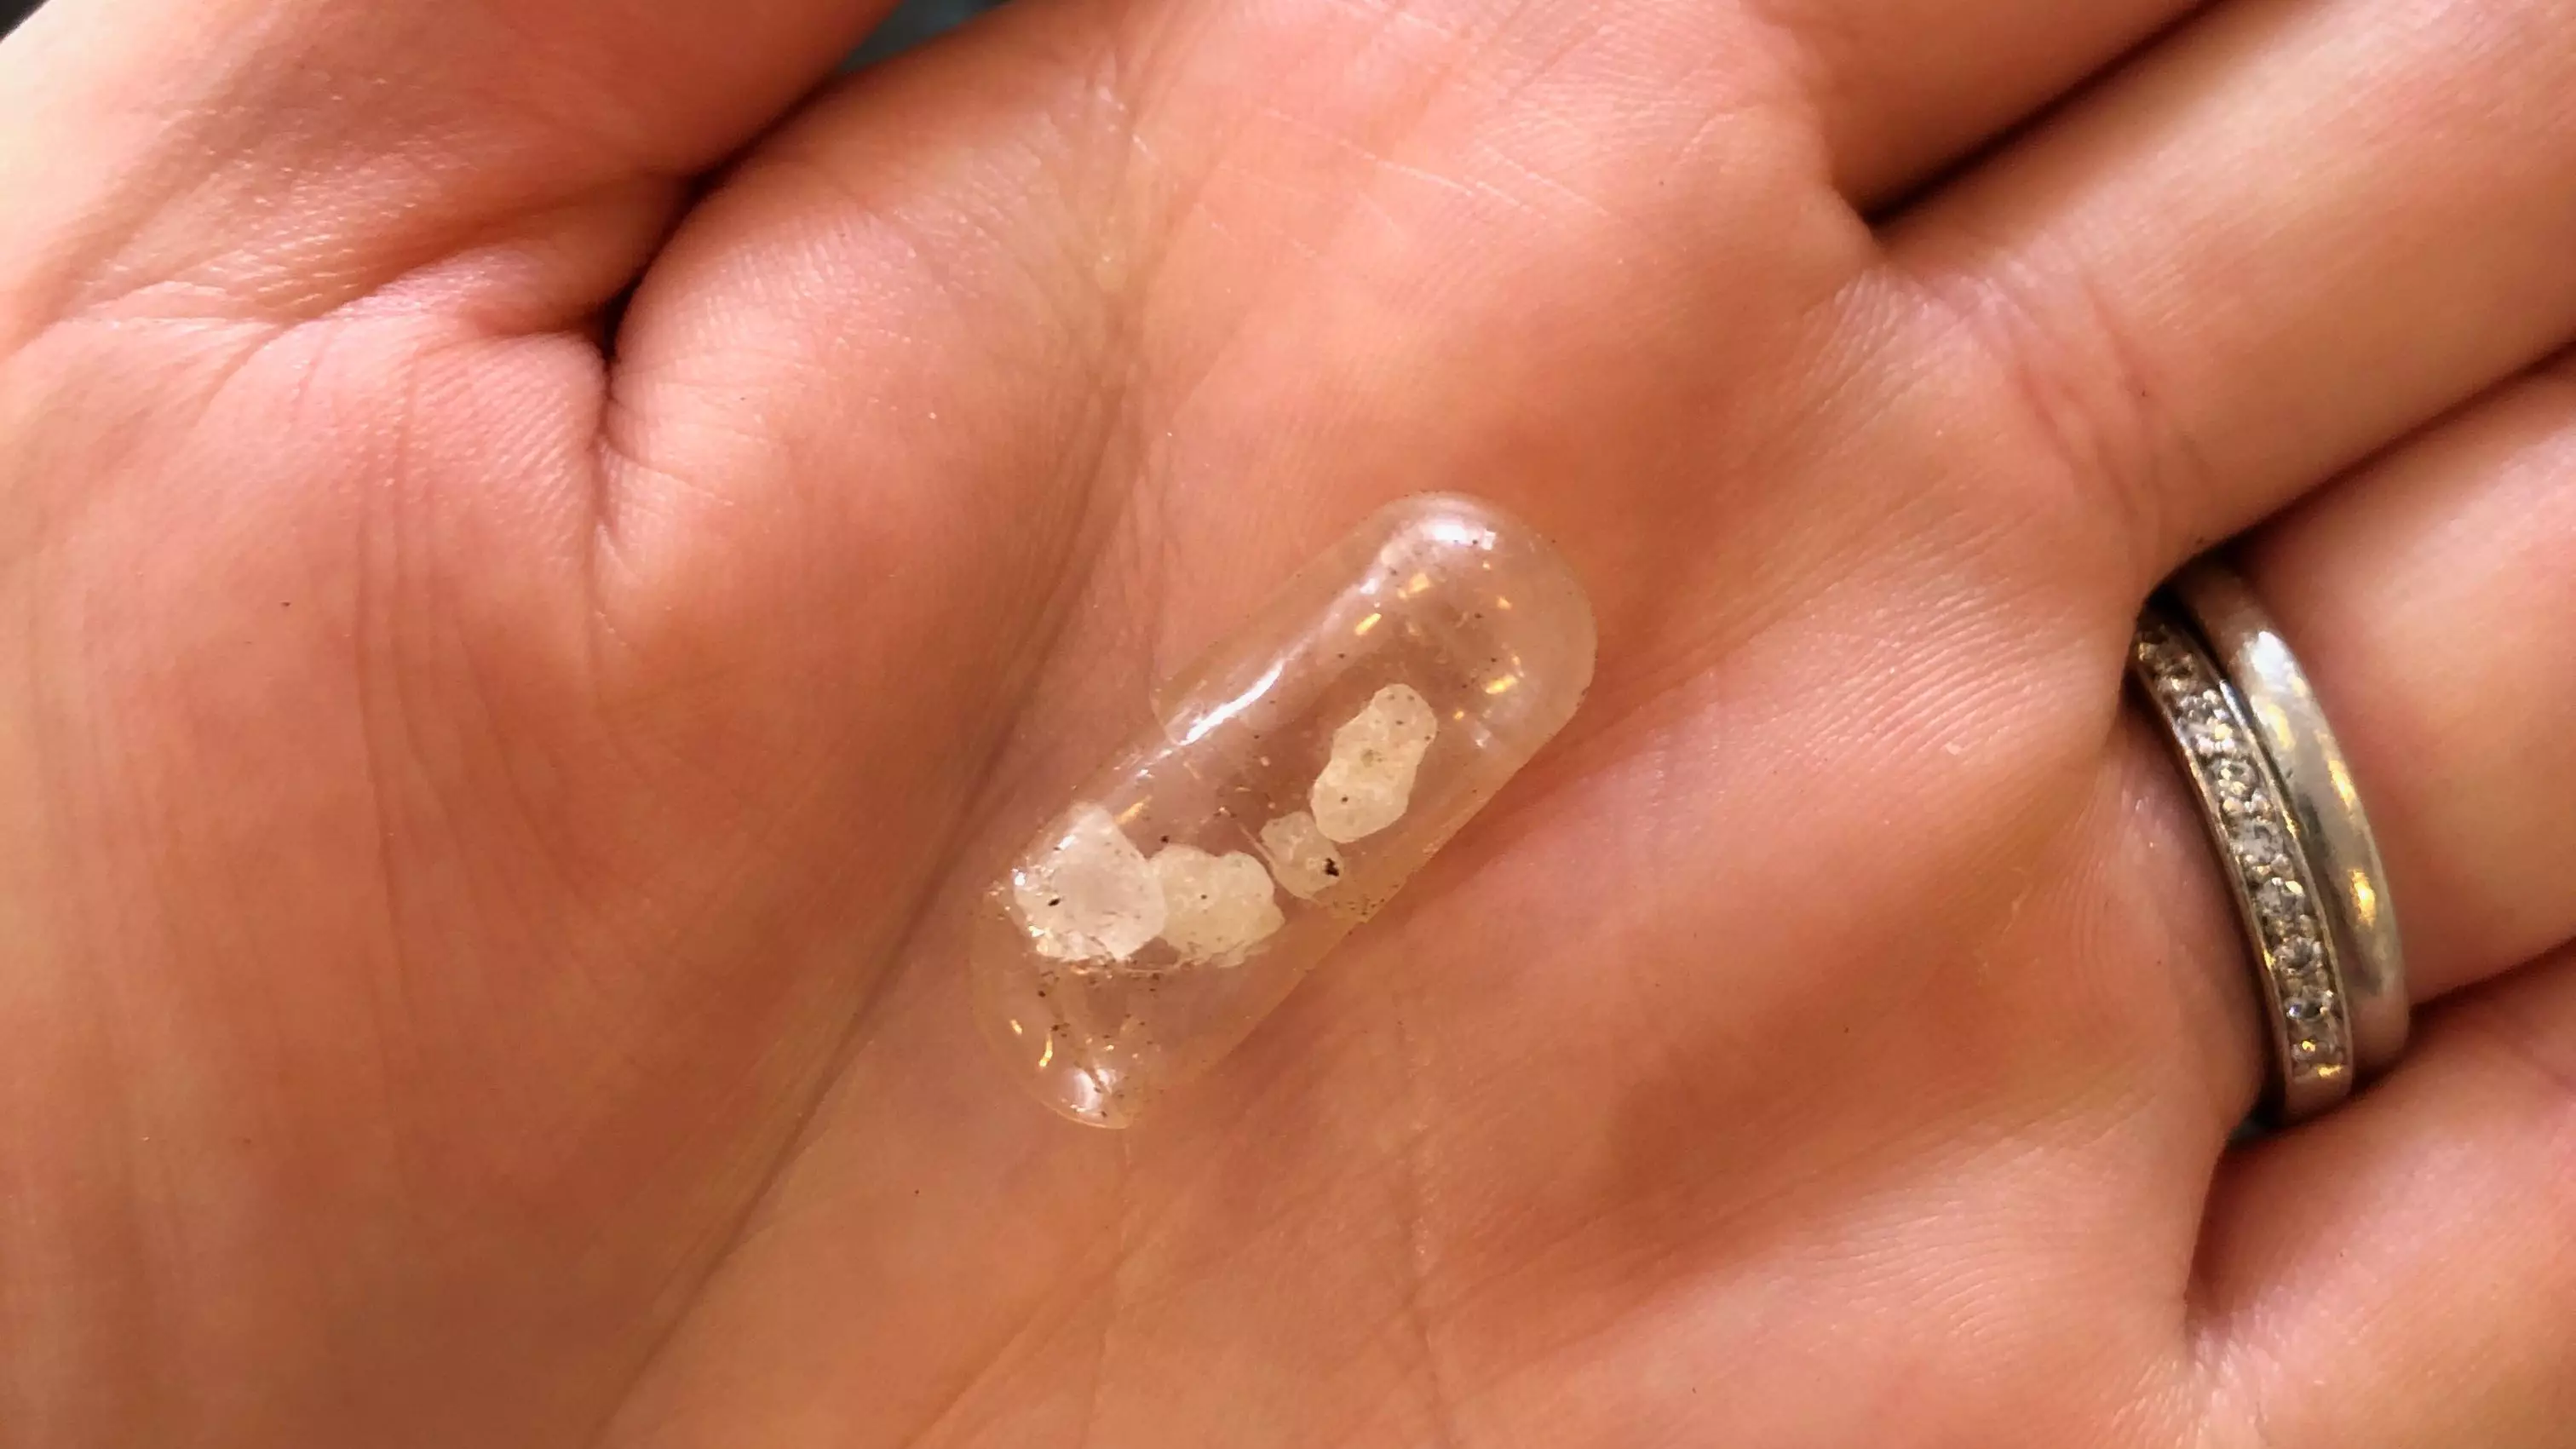 Mum's Warning After Daughter, One, Puts 'MDMA' Capsule In Her Mouth